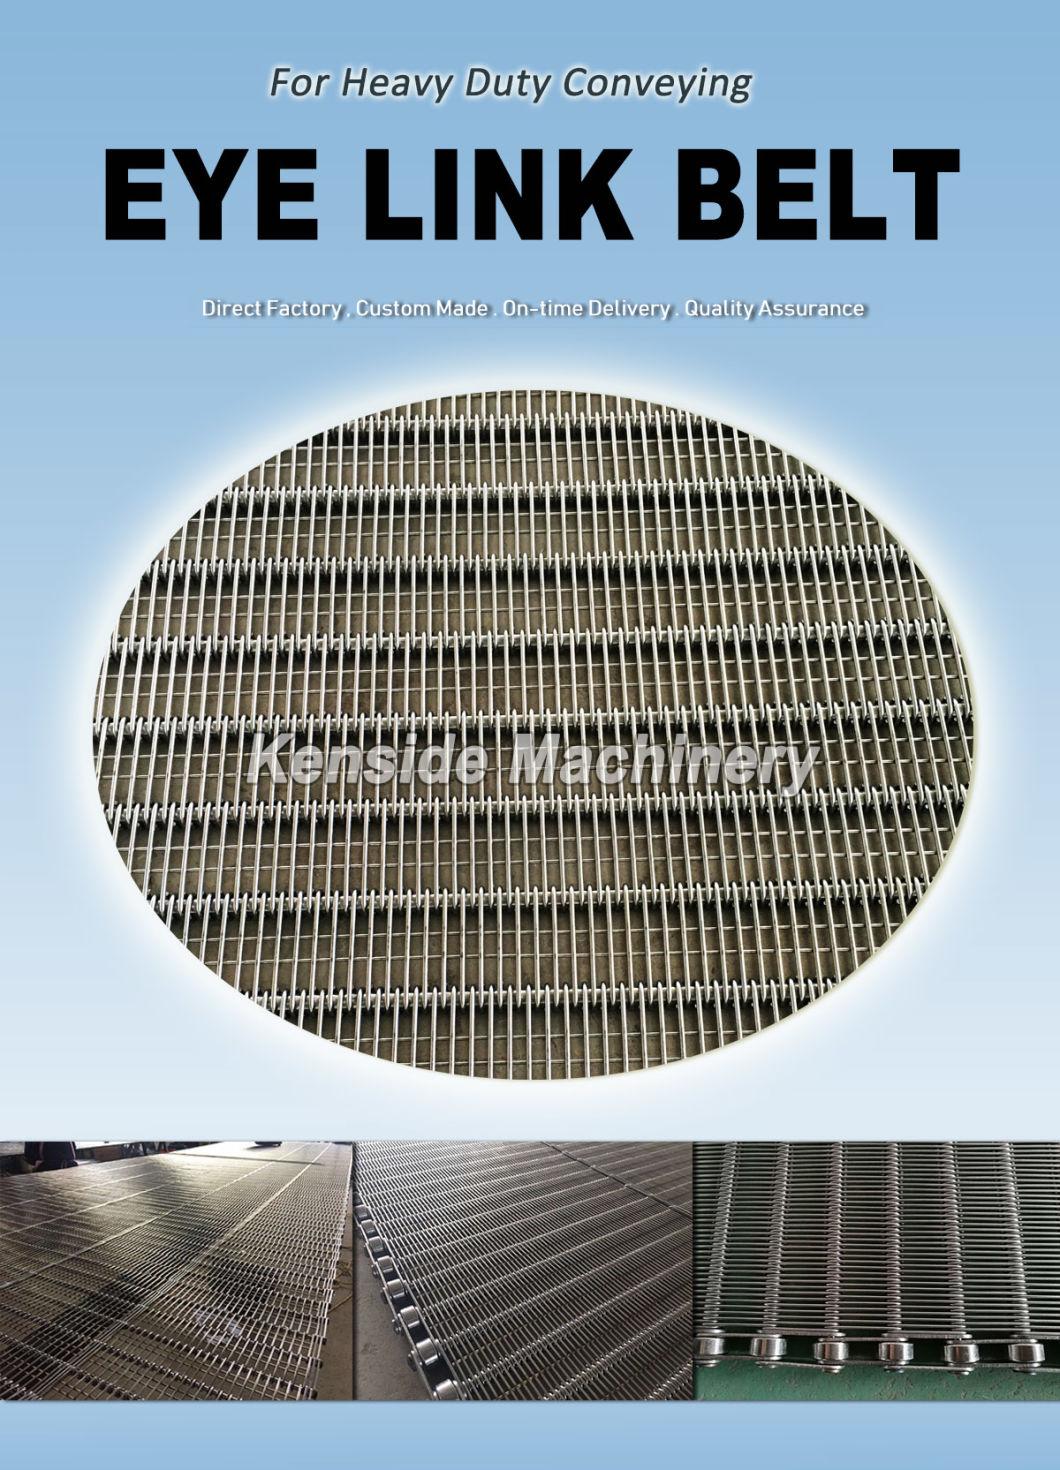 Stainless Steel Eye Link Belt for Freezing Systems